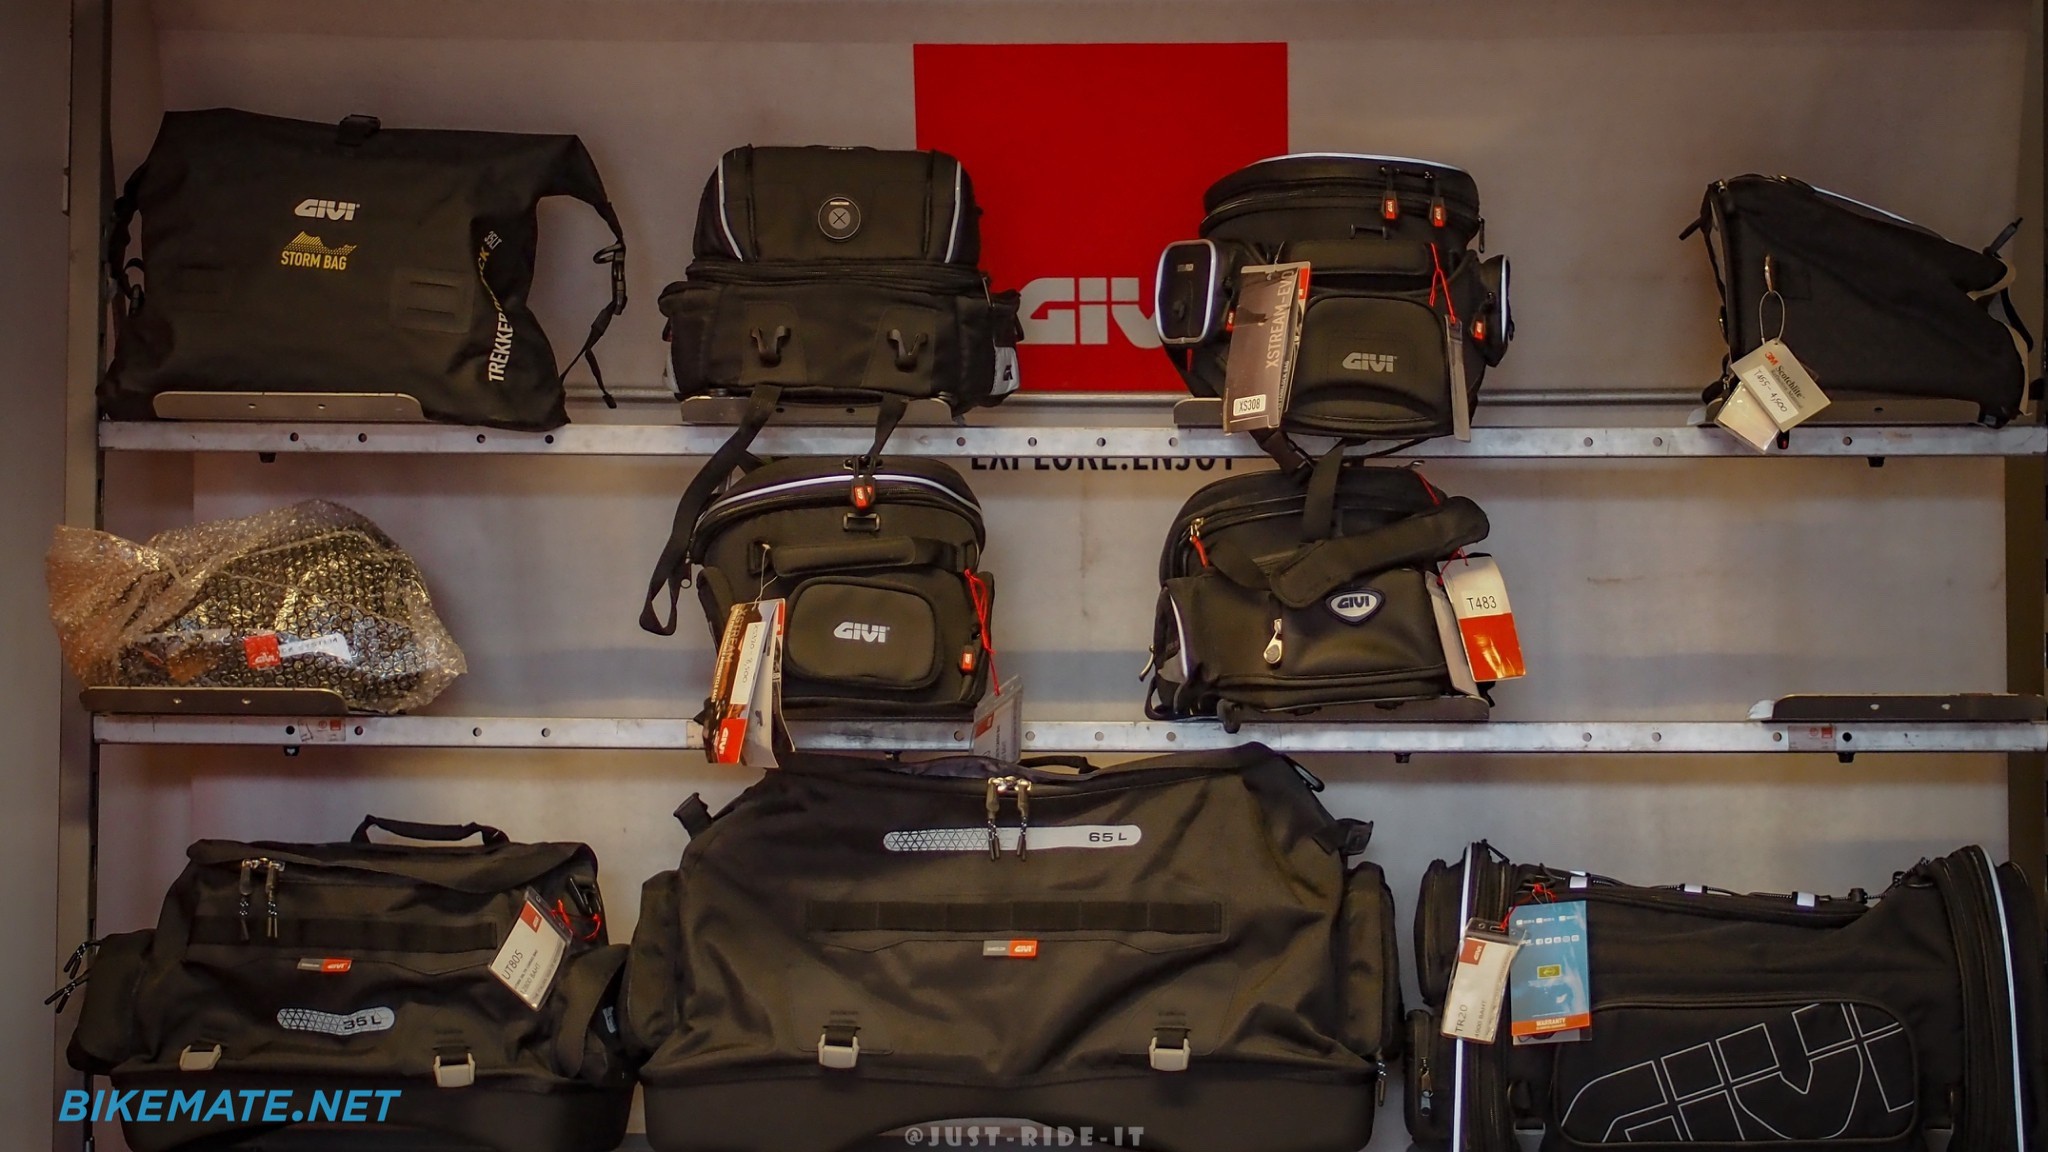 GIVI soft bags collection on display